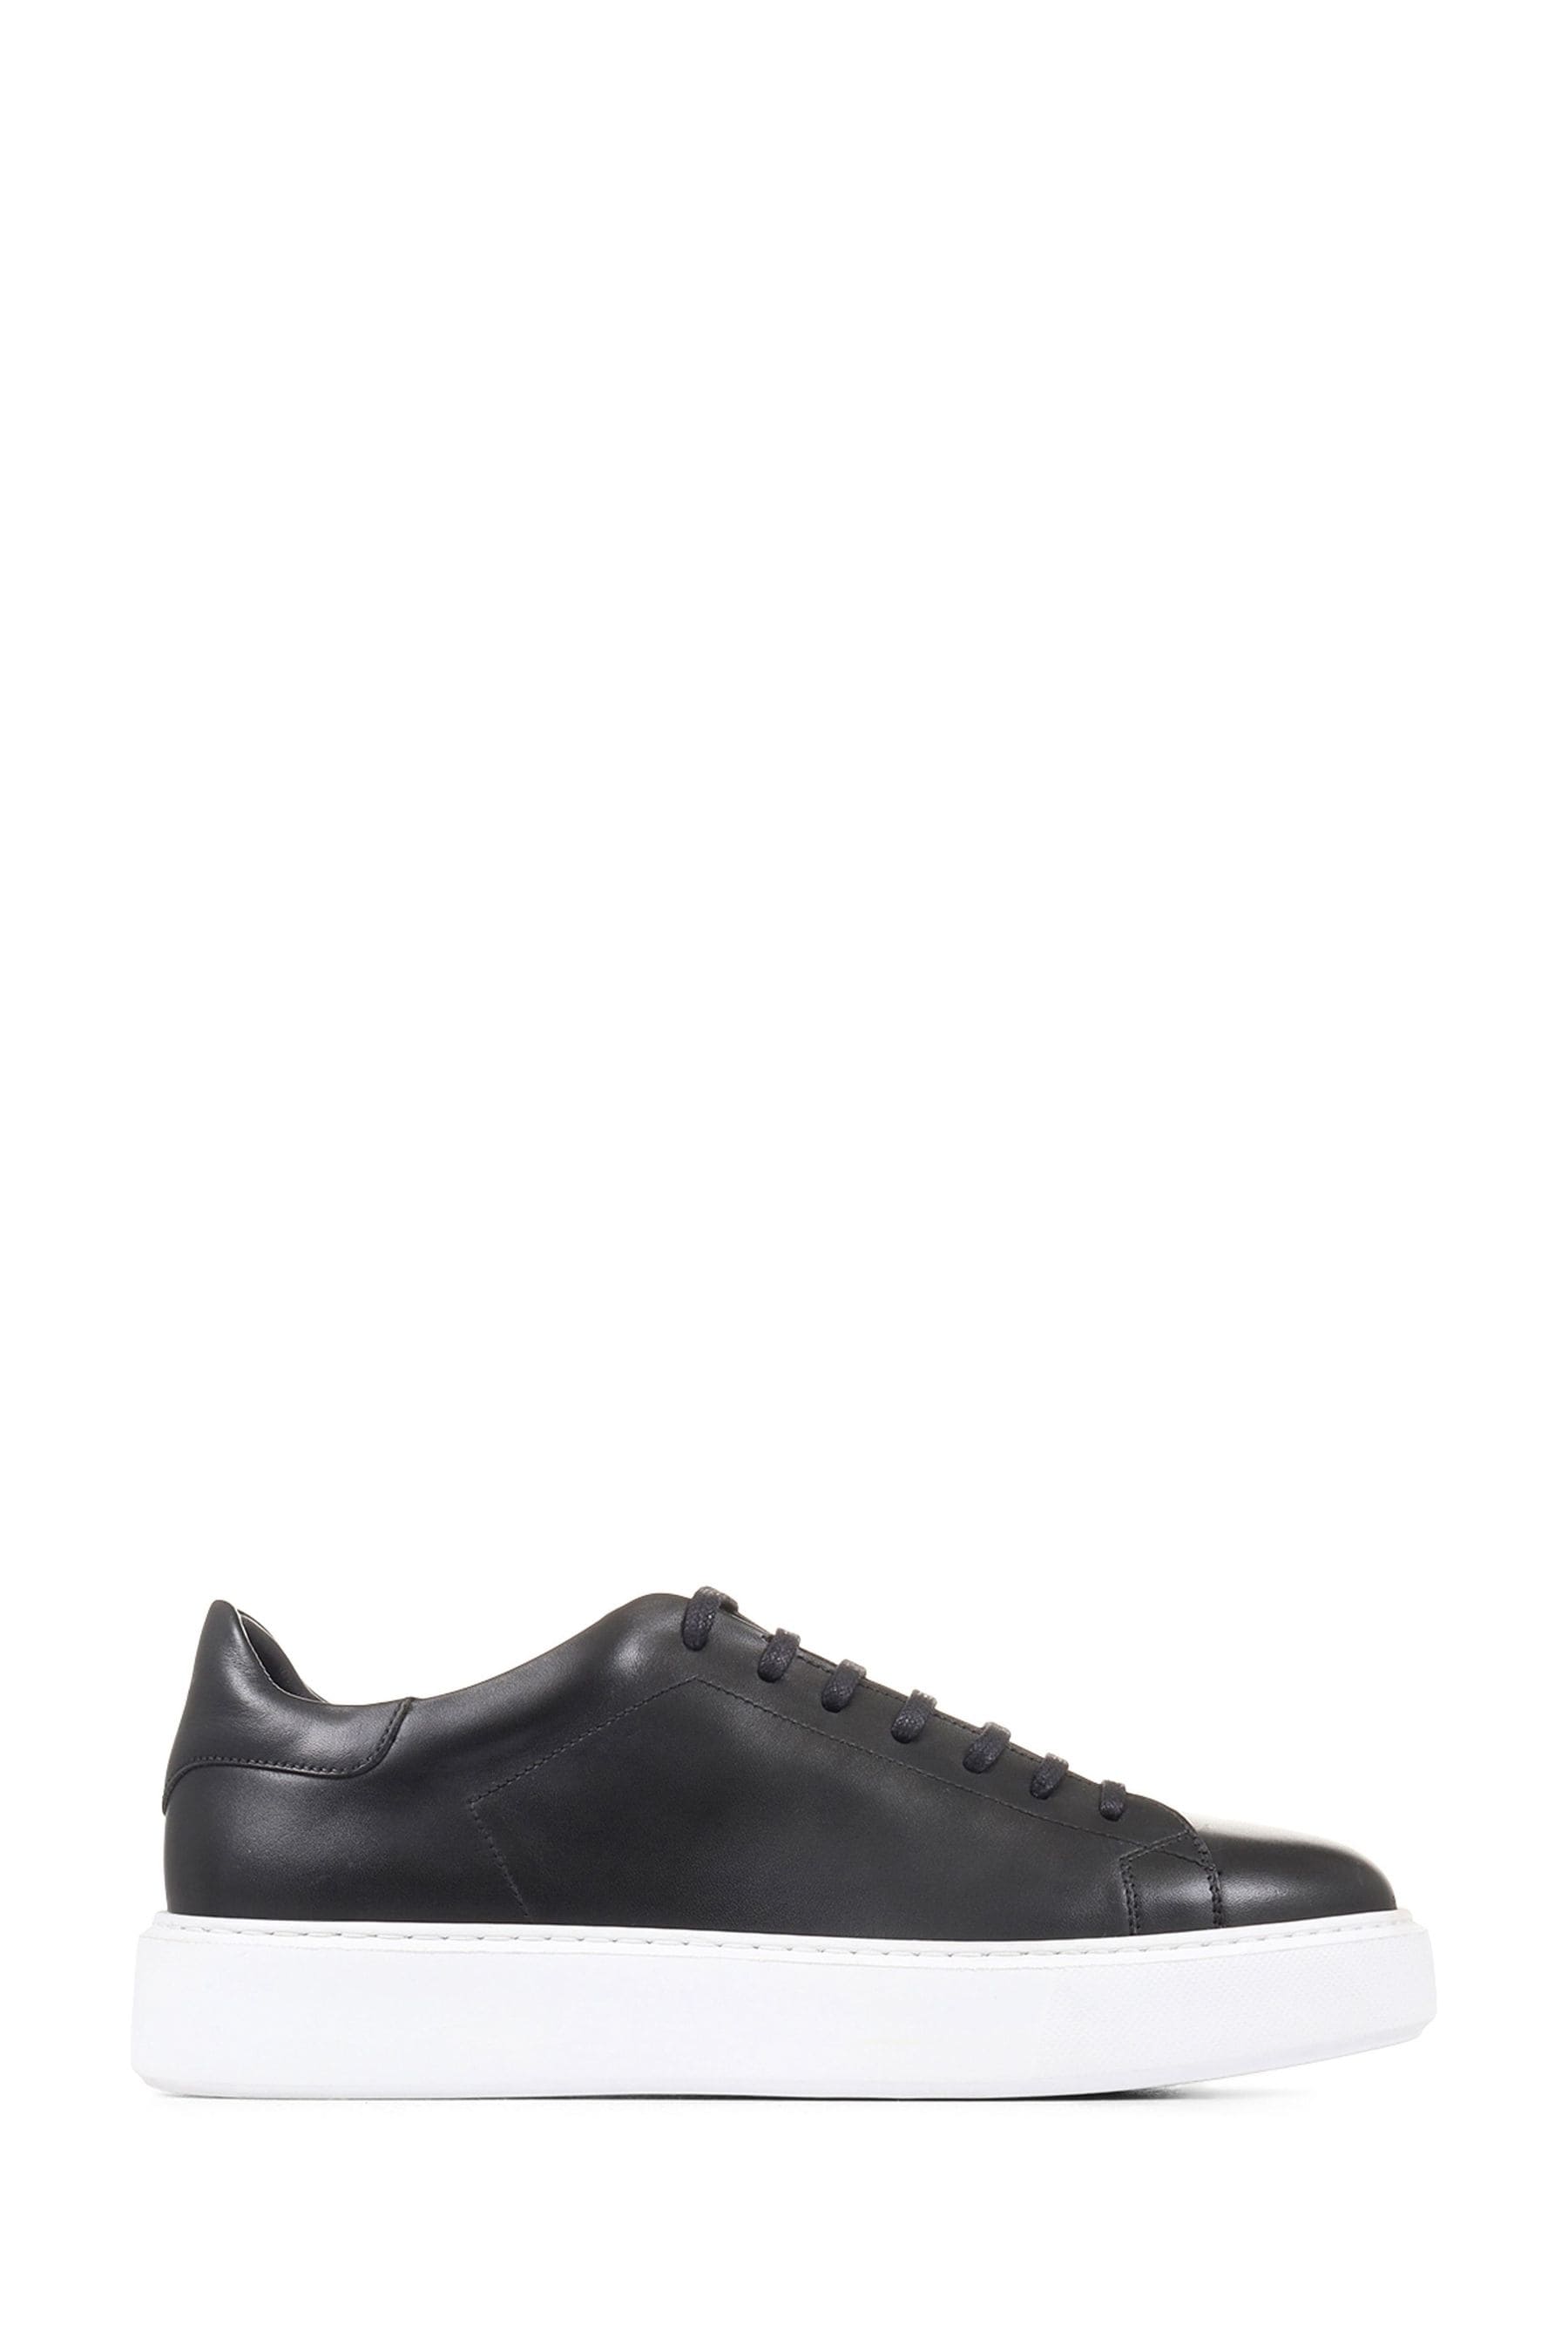 Buy Jones Bootmaker Sedbergh Smart Leather Black Trainers from the Next ...